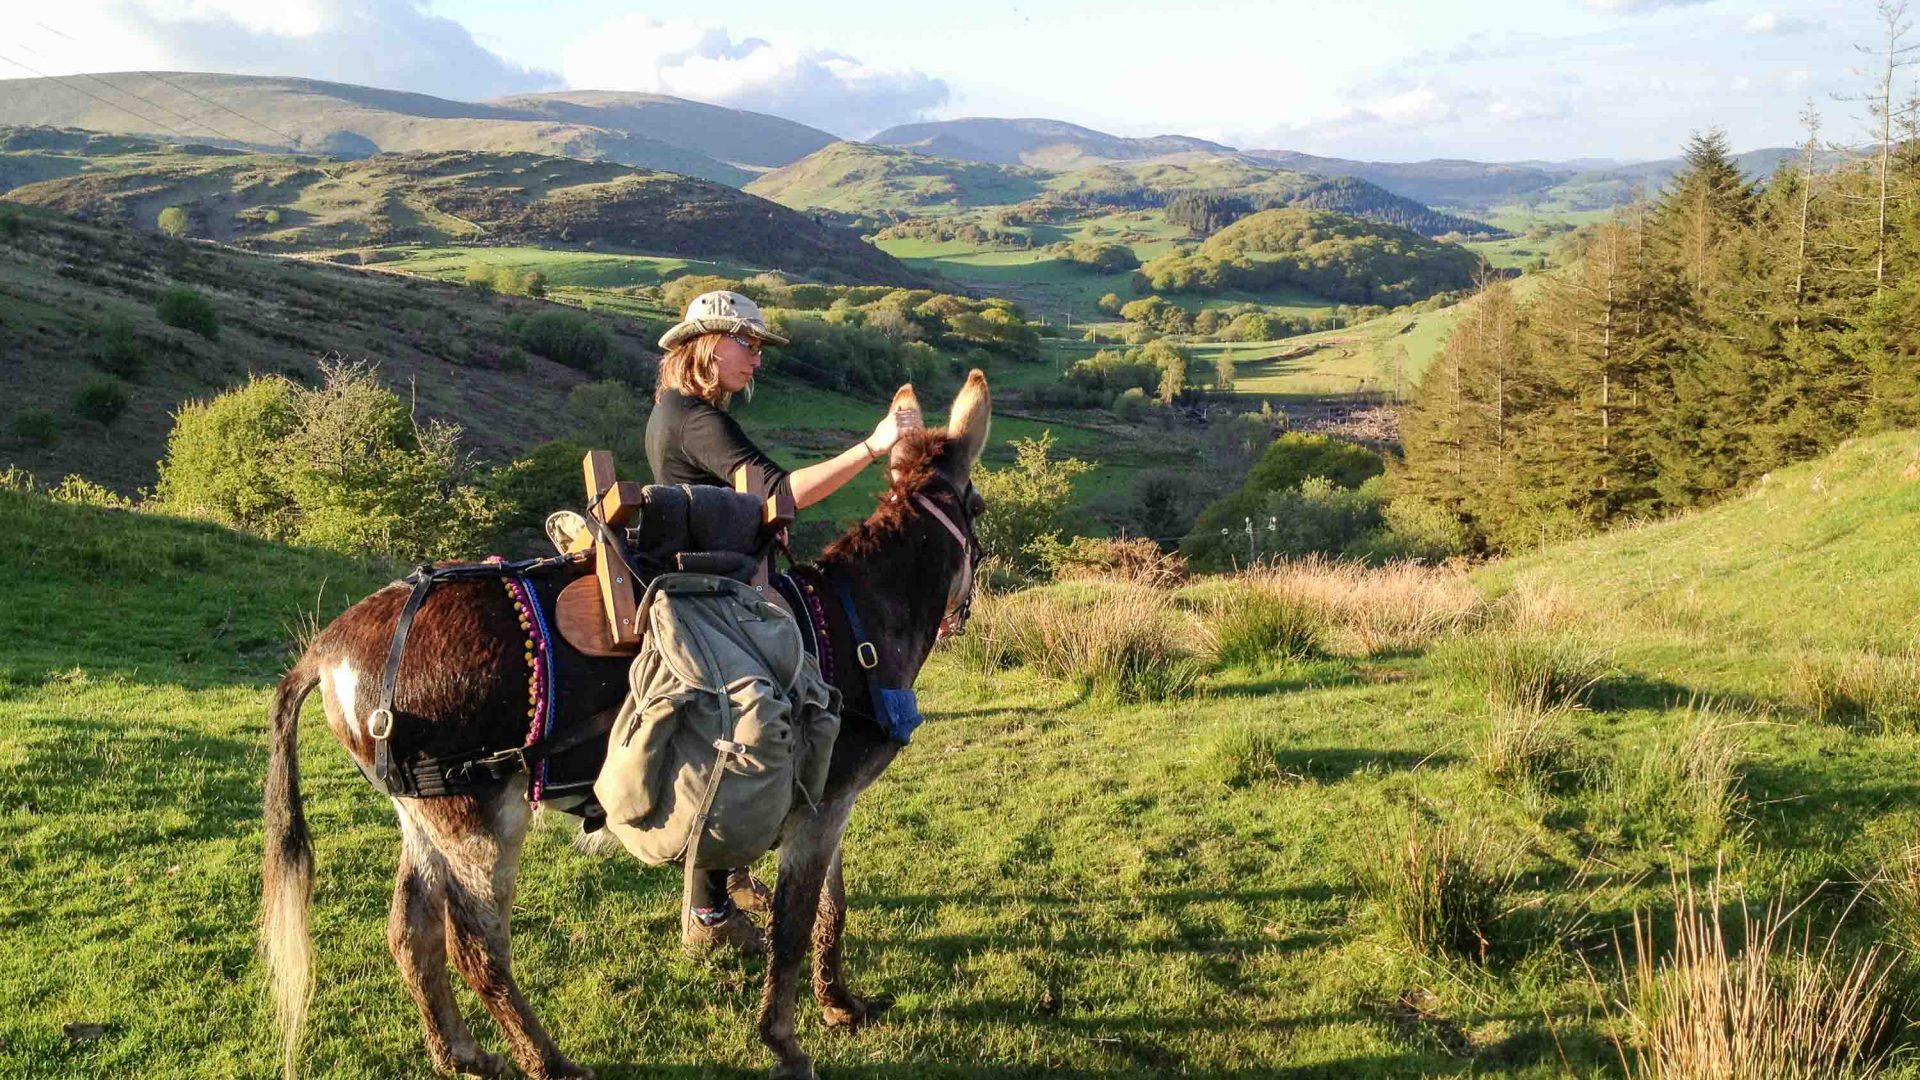 Hannah Engelkamp and her donkey Chico during their 1610-kilometer journey around Wales.